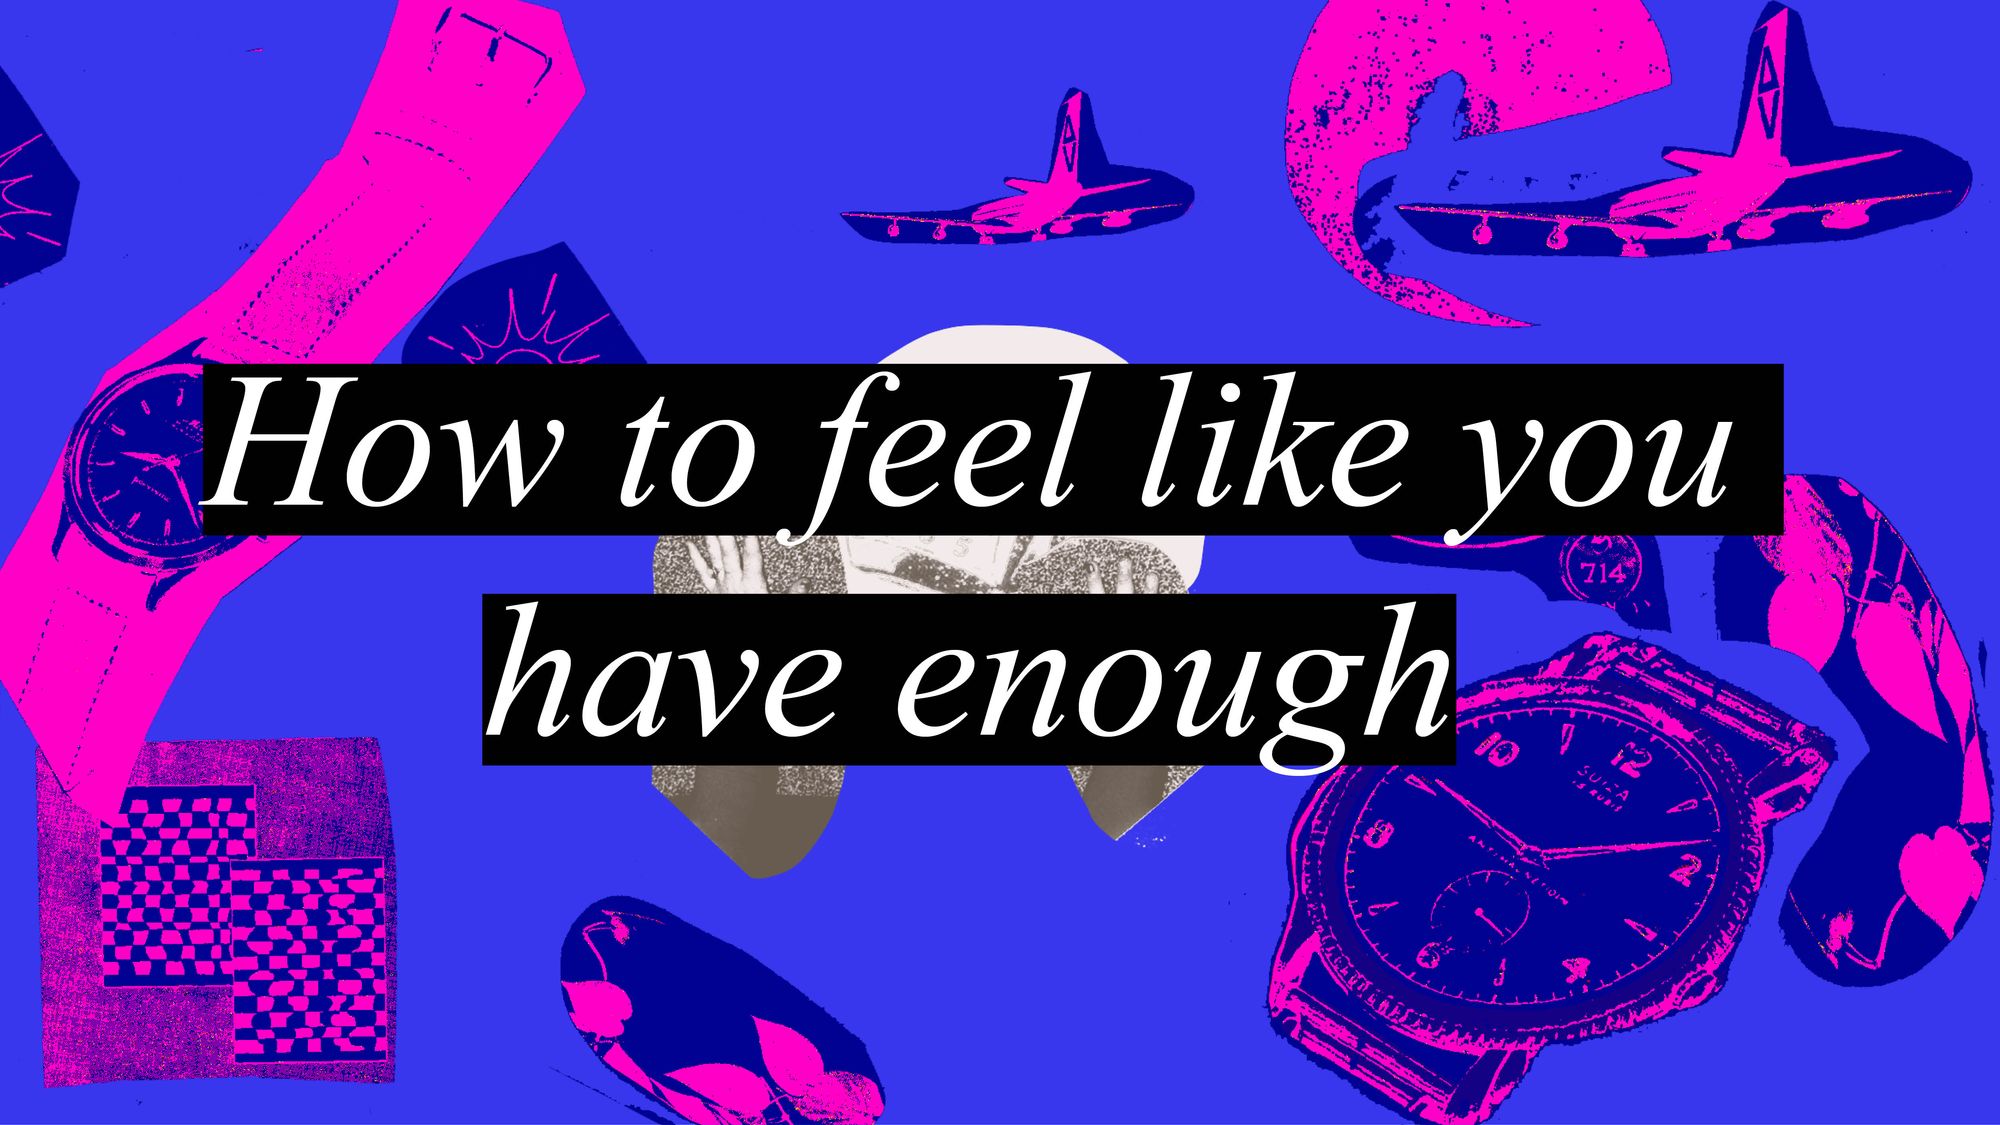 How to feel like you have enough – The Creative Independent